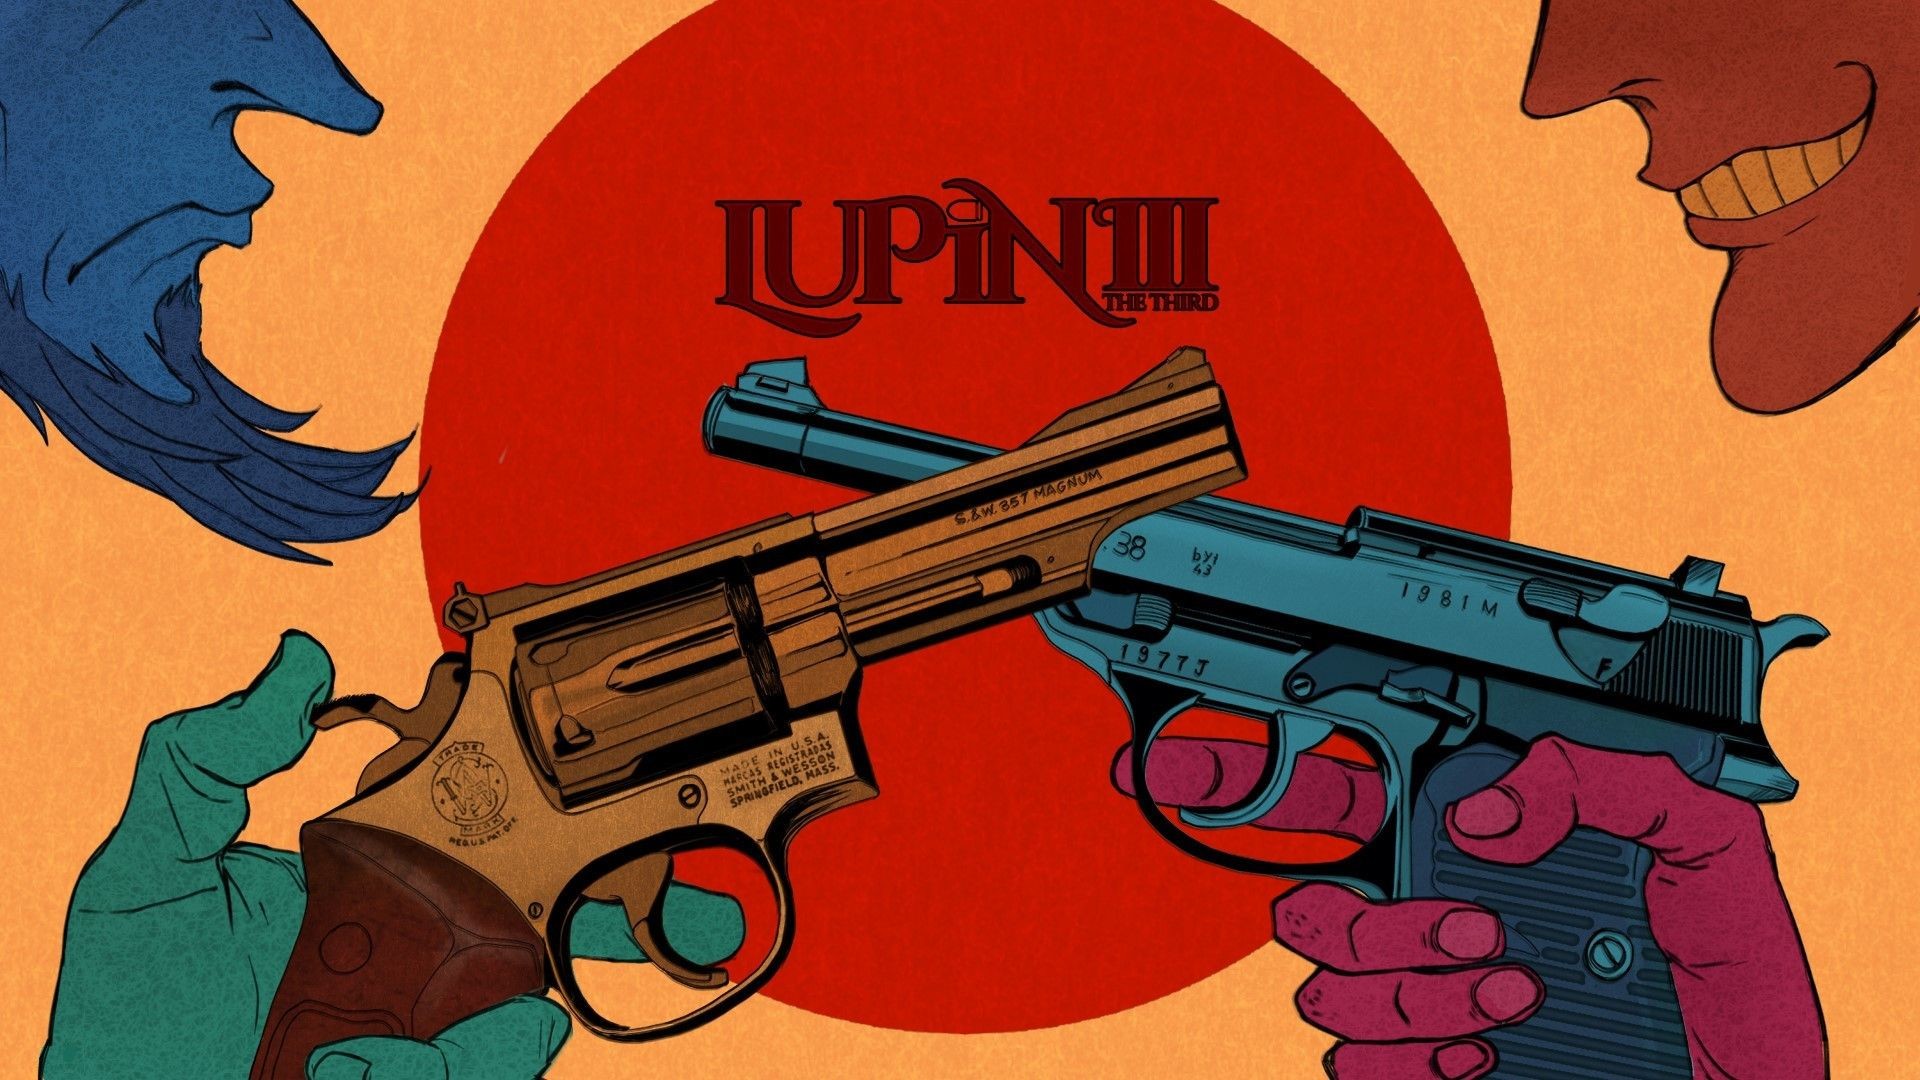 Lupin the Third Wallpaper.